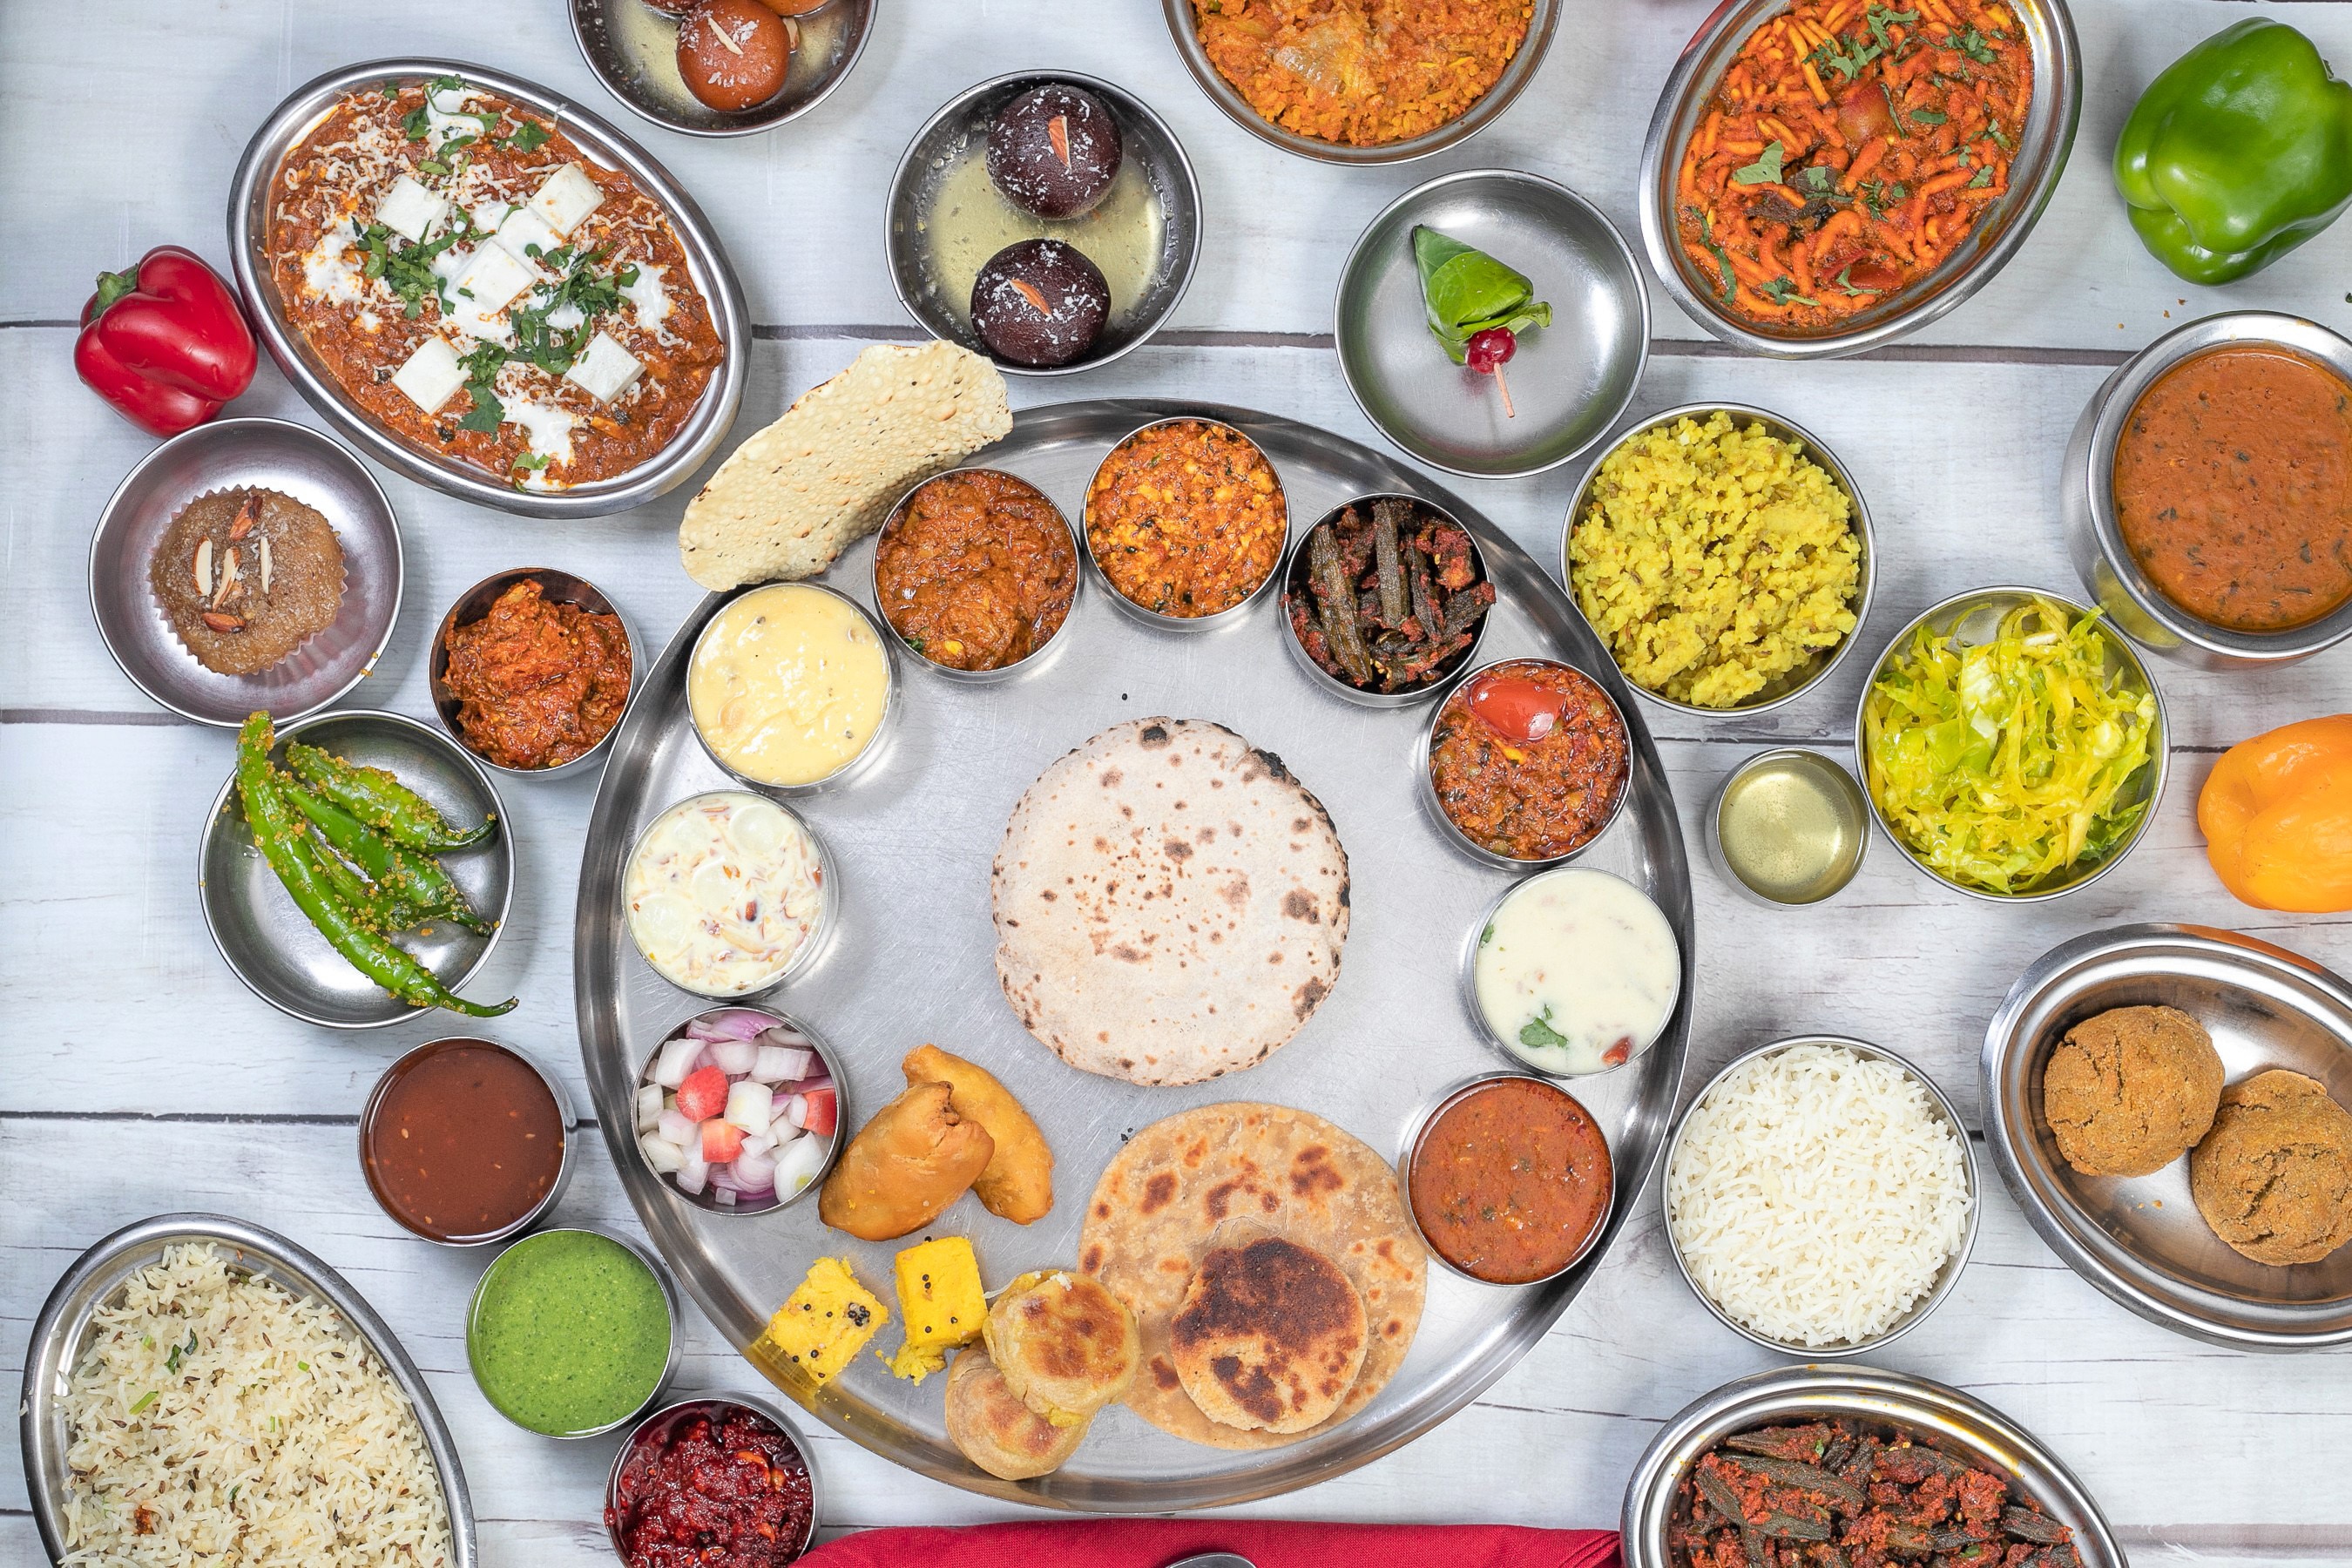 Fall in Love with Gujarati Cuisine - A Bucket List of 17 Foods to Try on Your Trip